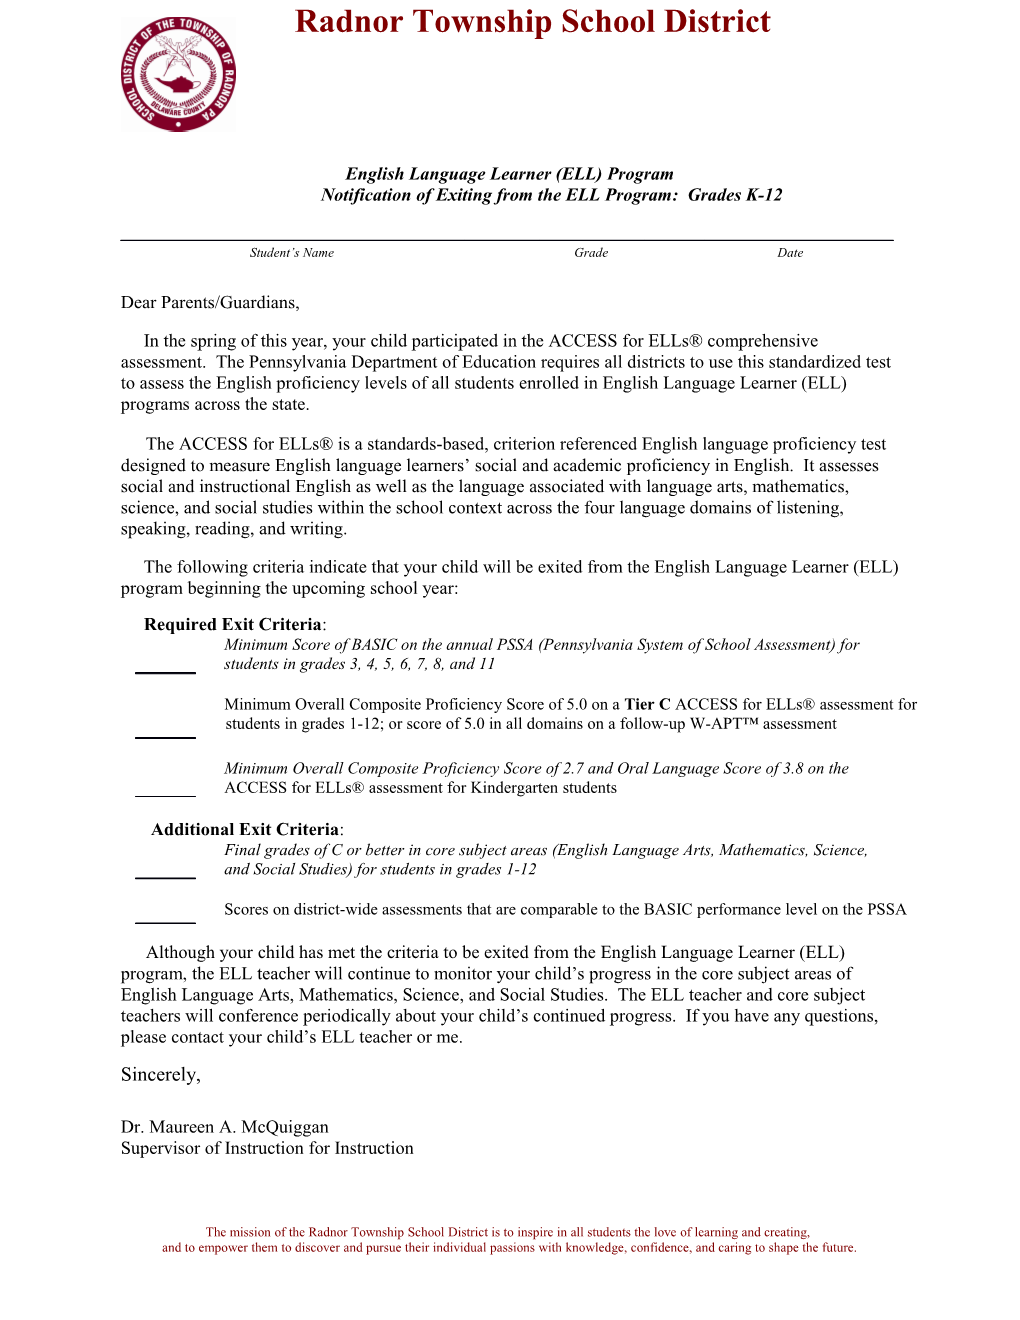 English Language Learner (ELL) Program Notification of Exiting from the ELL Program: Grades K-12